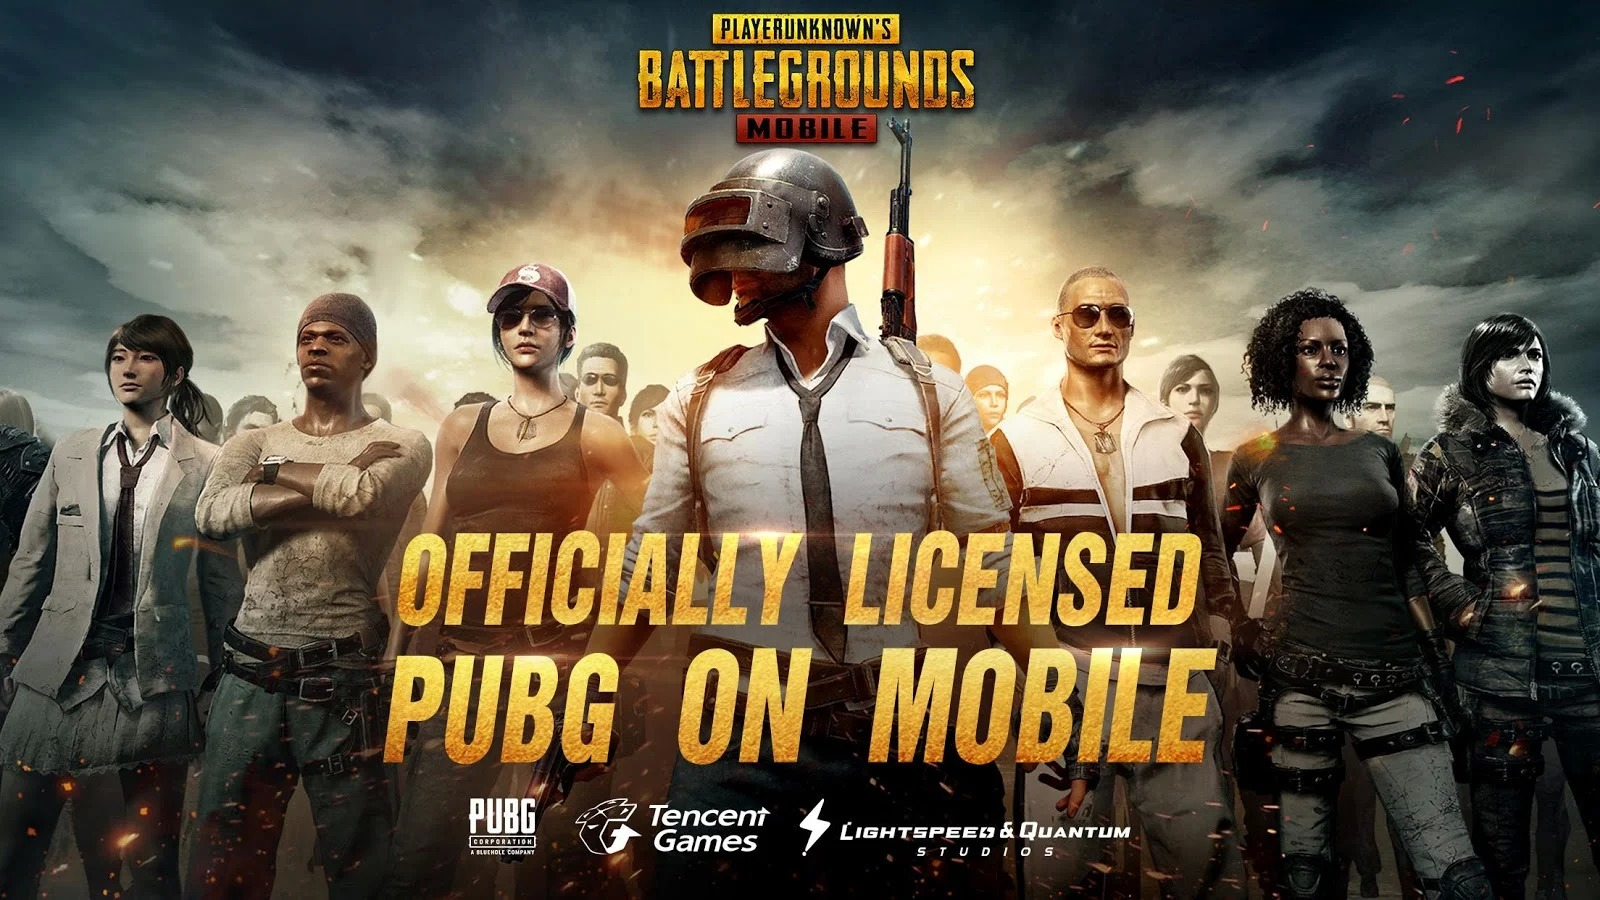 Free Fire Edges Among Us, PUBG Mobile to Become Most Downloaded